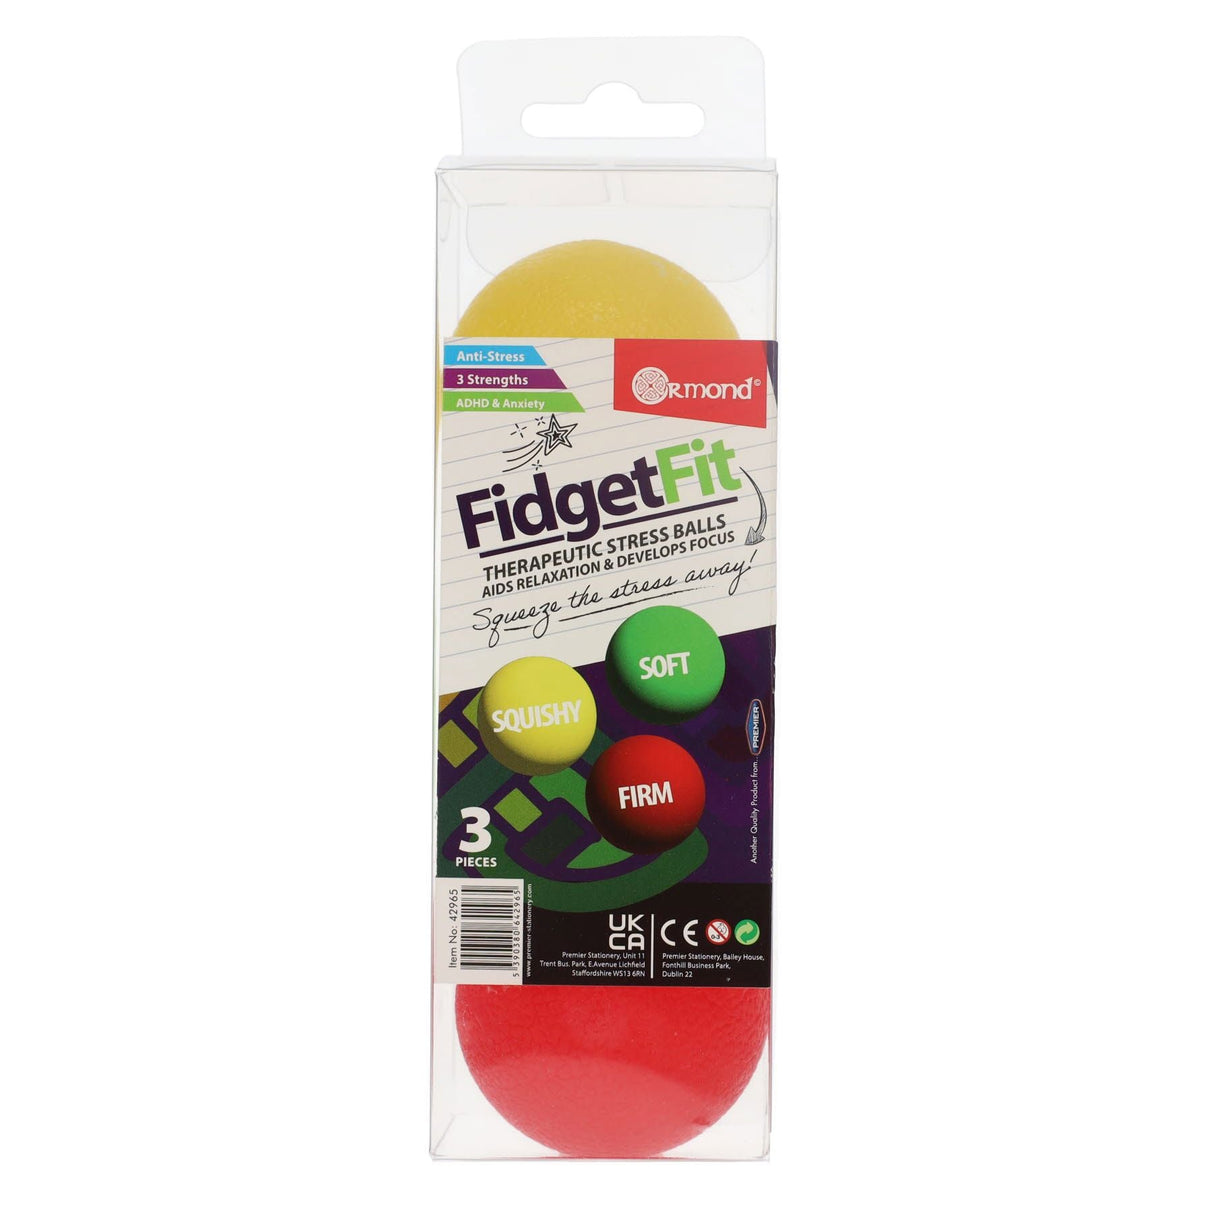 Ormond Fidget Fit Therapeutic Stress Balls - Pack of 3-Educational Games-Ormond|StationeryShop.co.uk